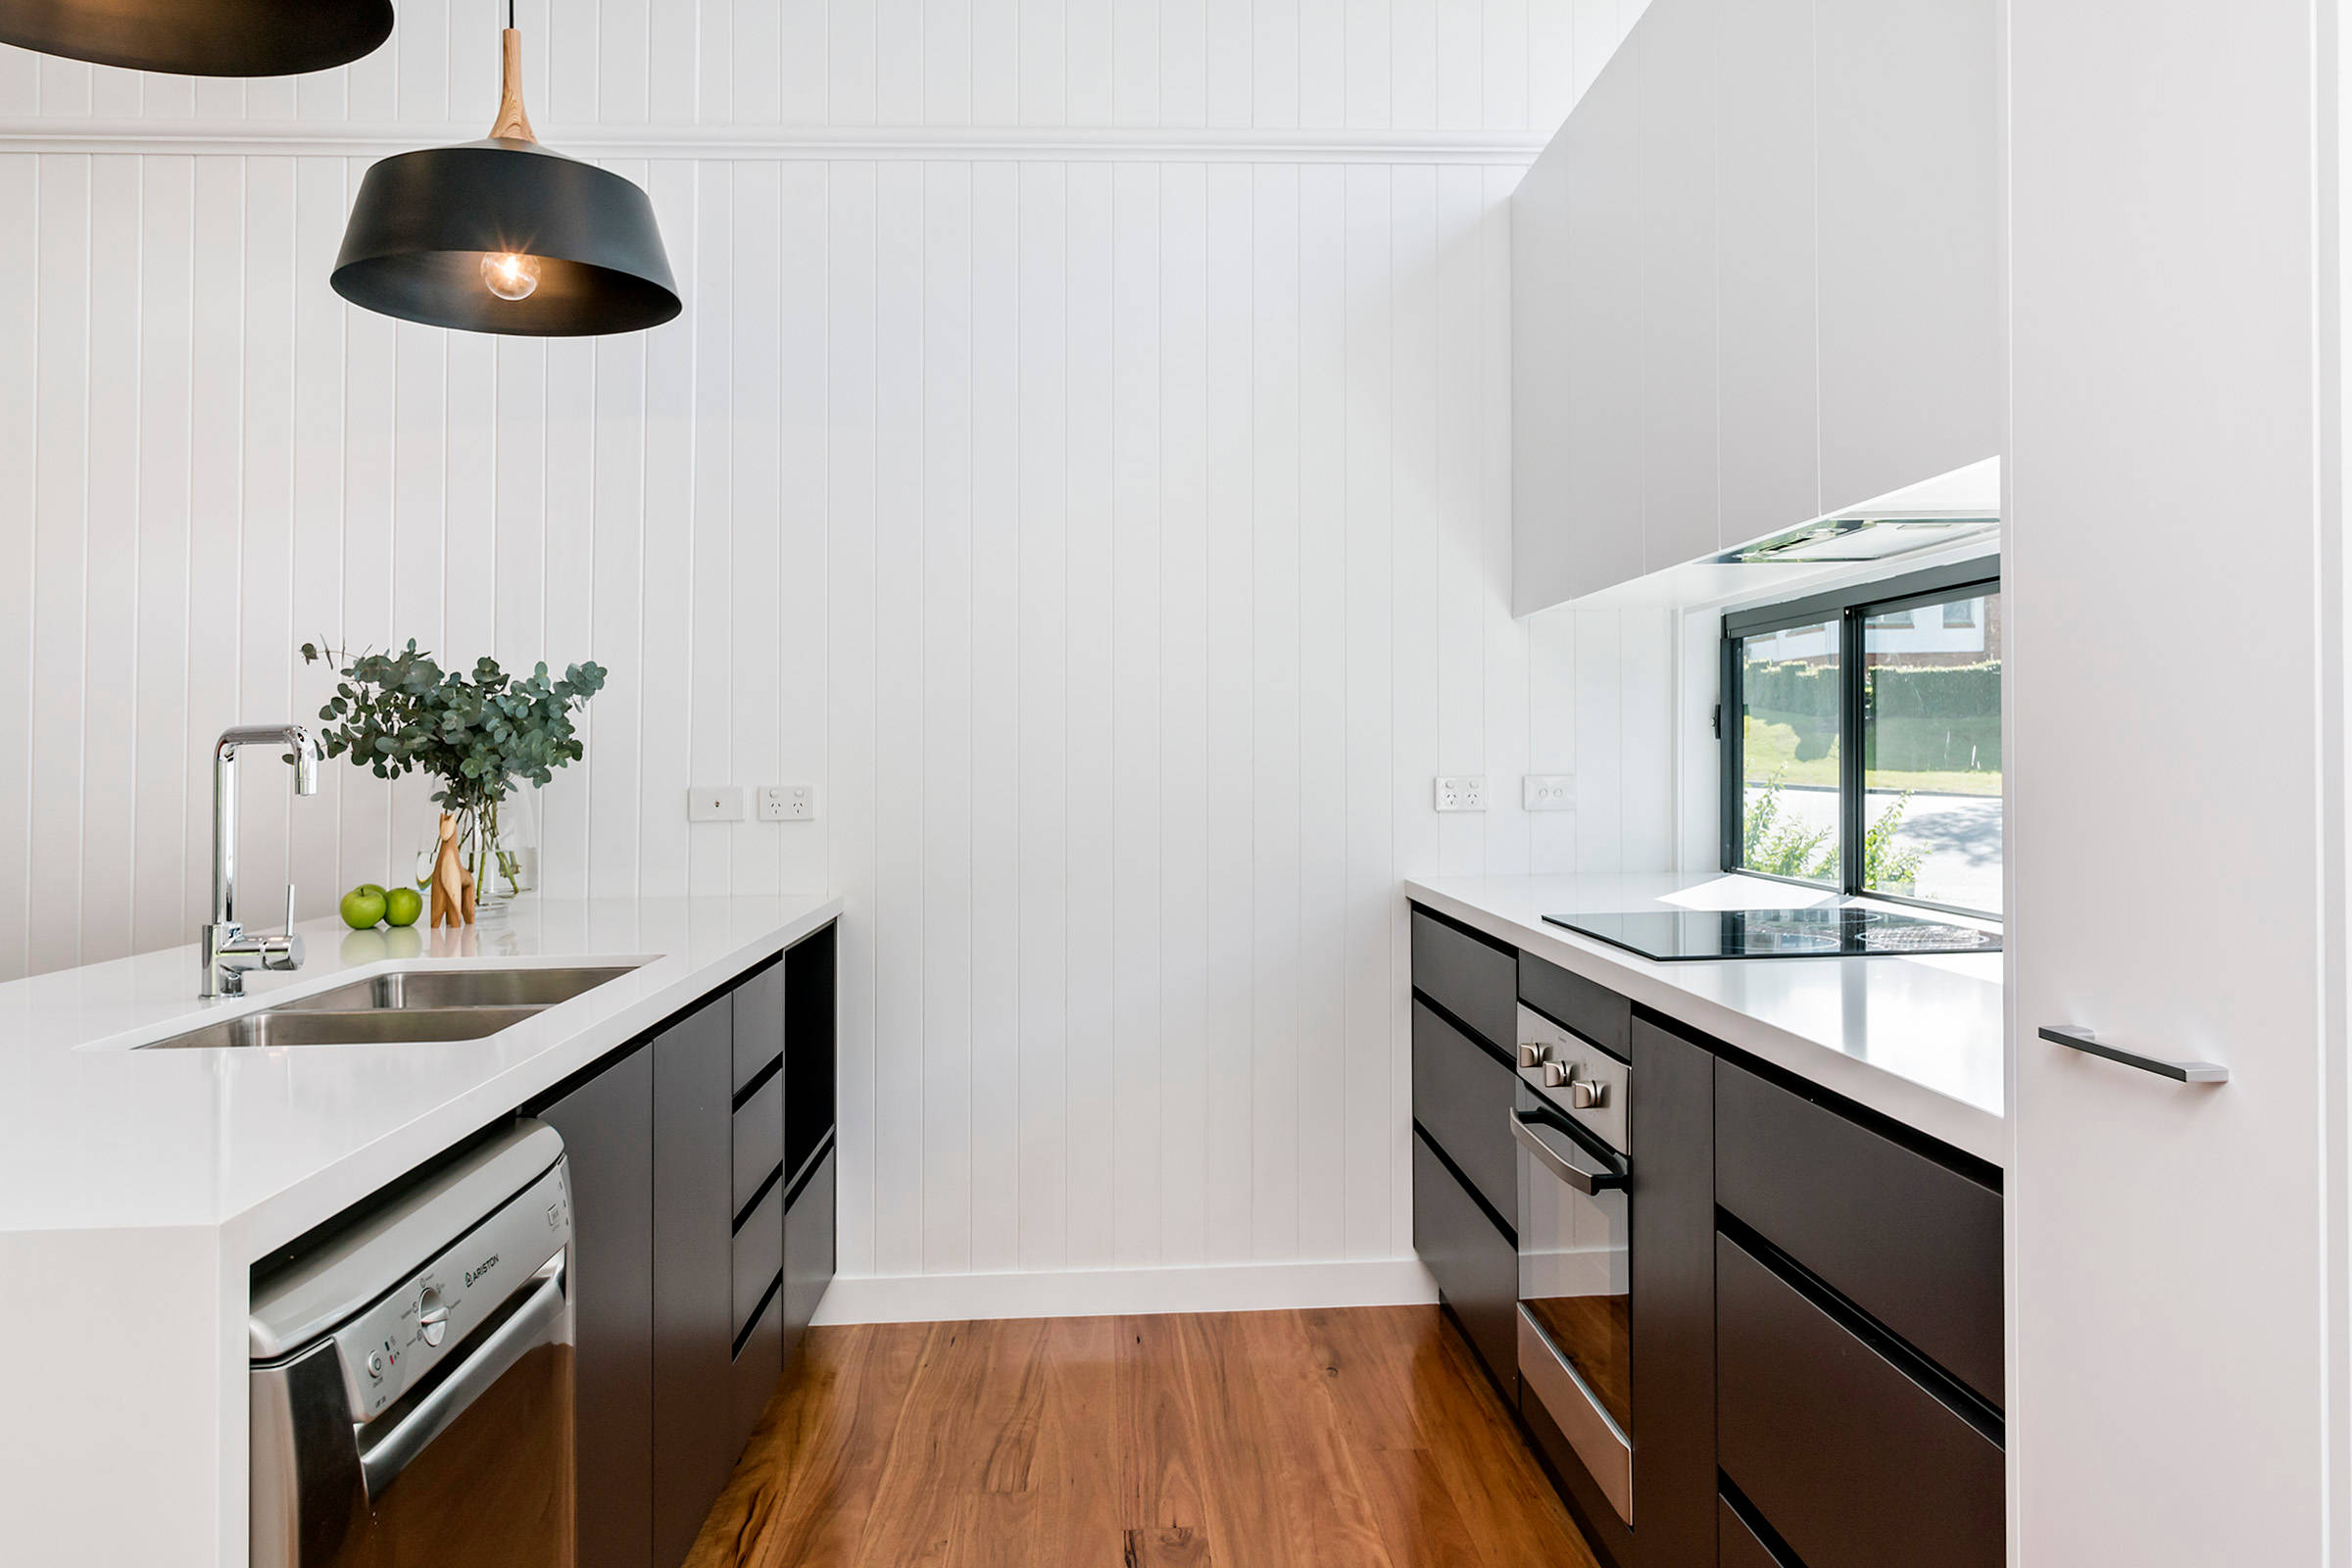 The Handleless Kitchen A Look At Cabinets Without Hardware Houzz Au